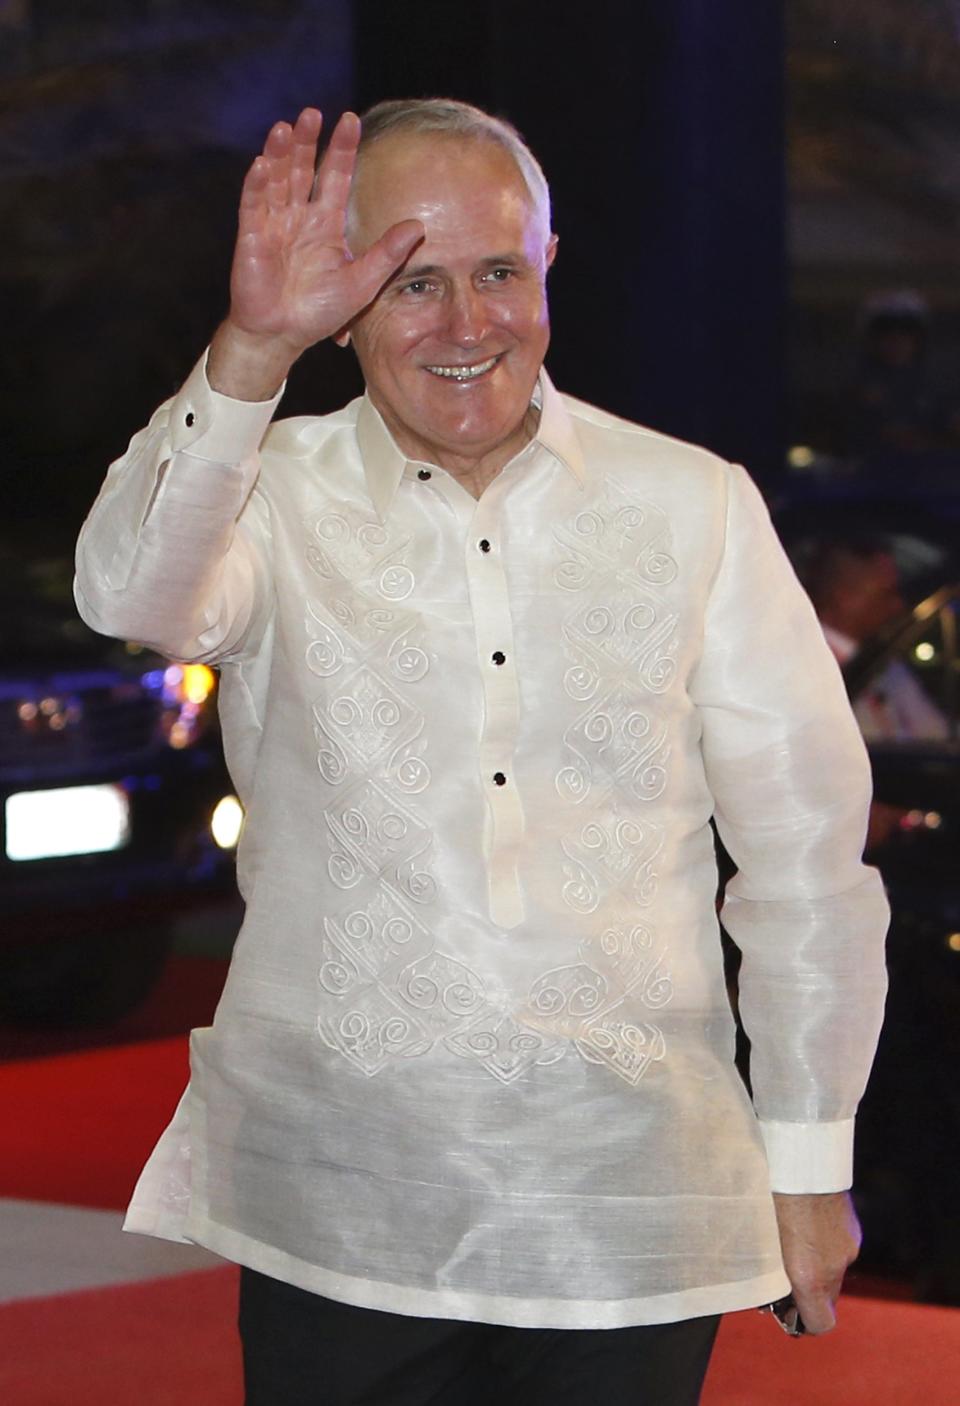 Australia's Prime Minister Malcolm Turnbull arrives in a traditional barong for a welcome dinner during the Asia-Pacific Economic Cooperation (APEC) summit in the capital city of Manila